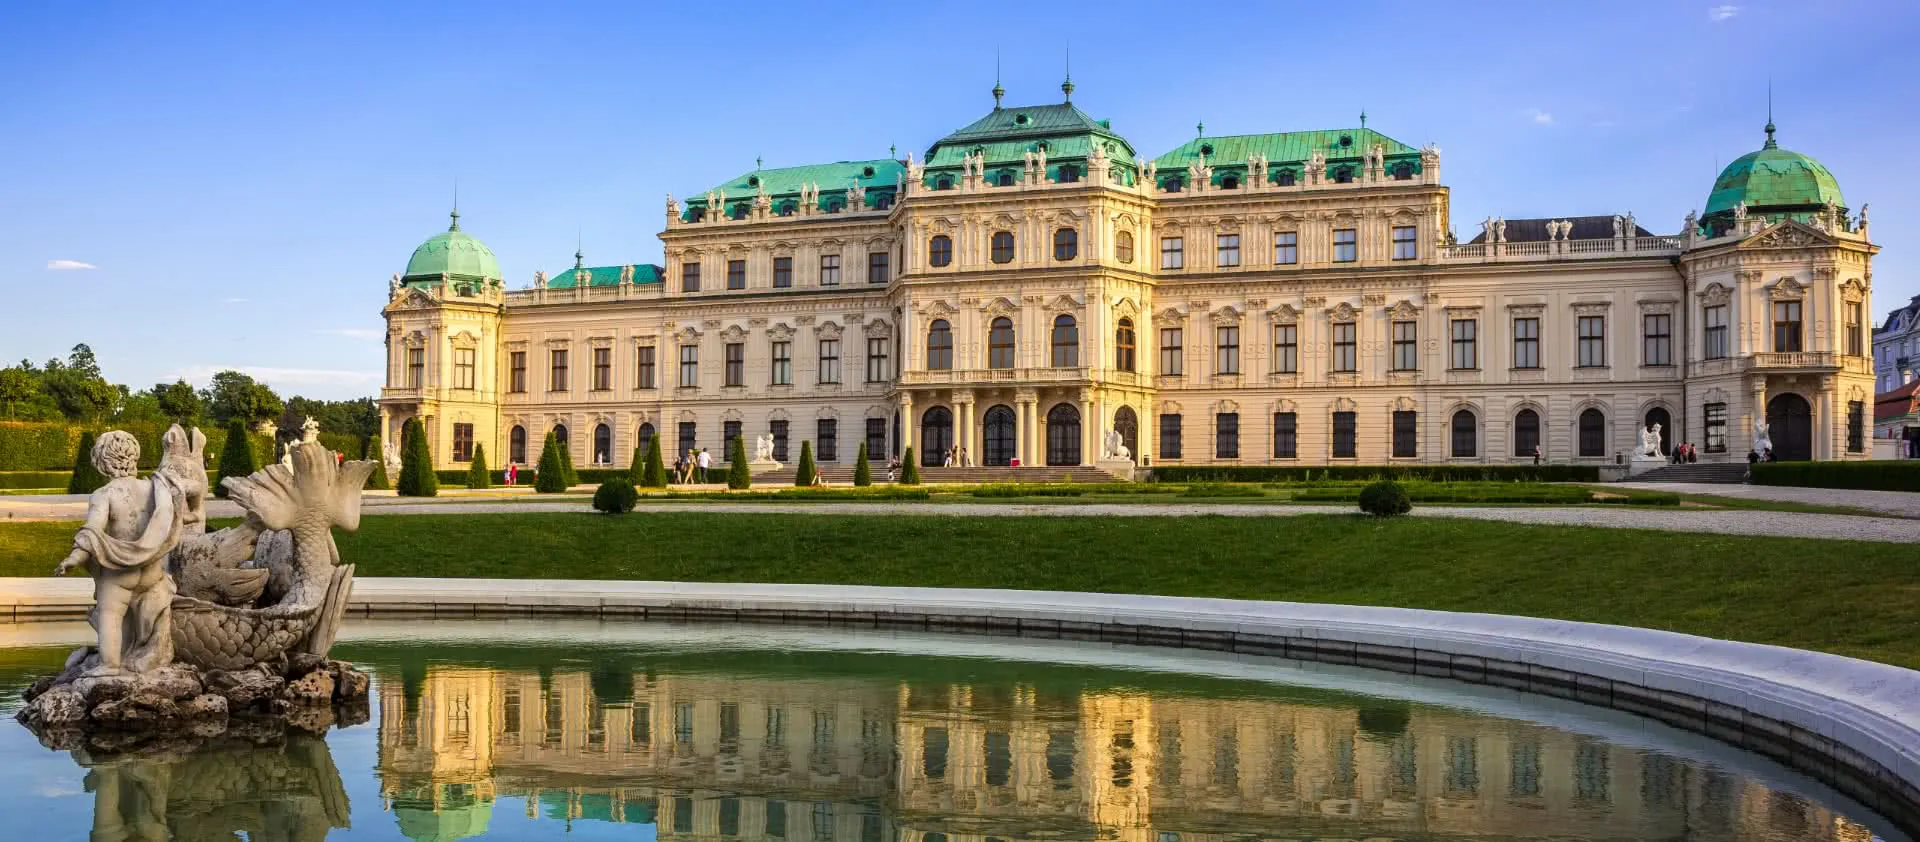 Vienna - the destination with youth hostels